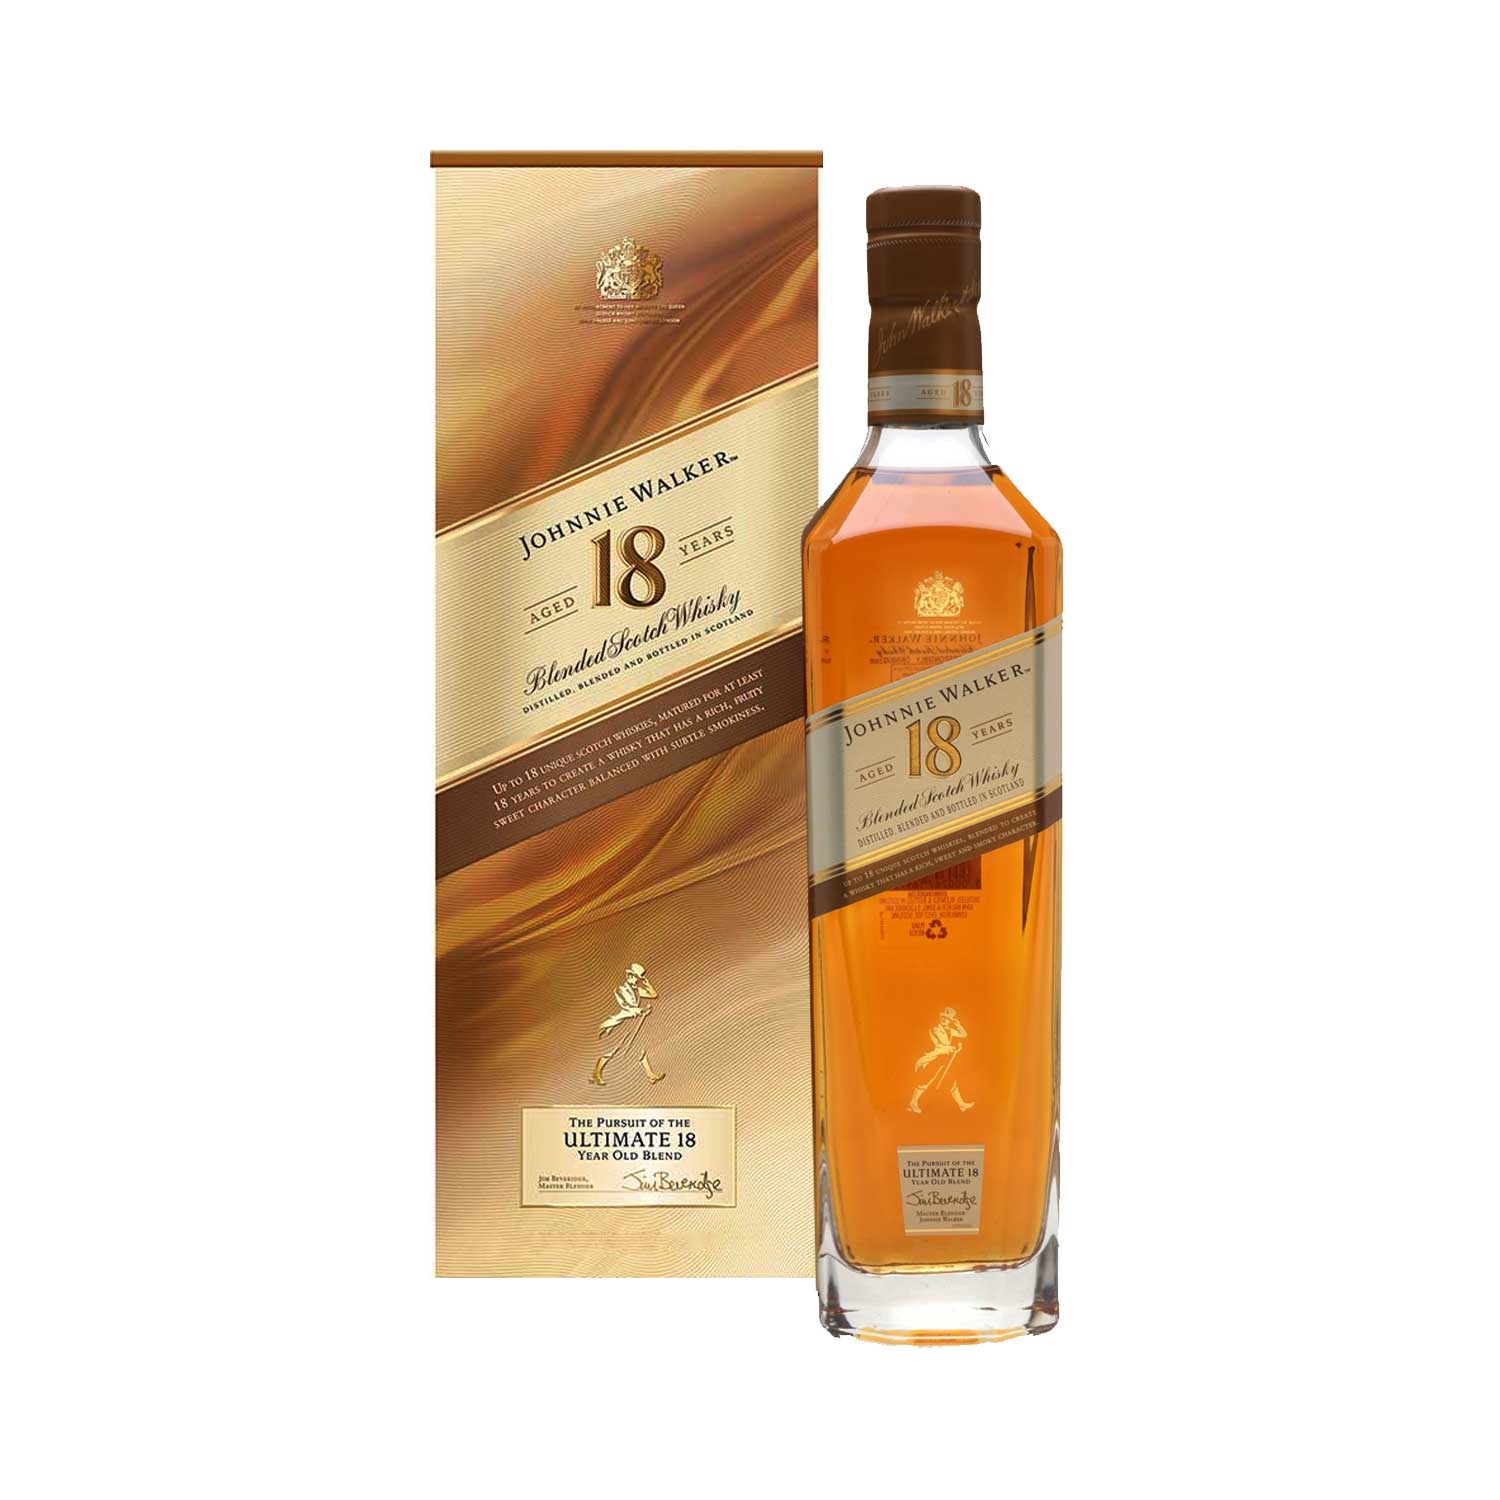 Johnnie Walker The Pursuit of the ULTIMATE 18 Years Old Blend 40% Vol. 0,7l in Giftbox